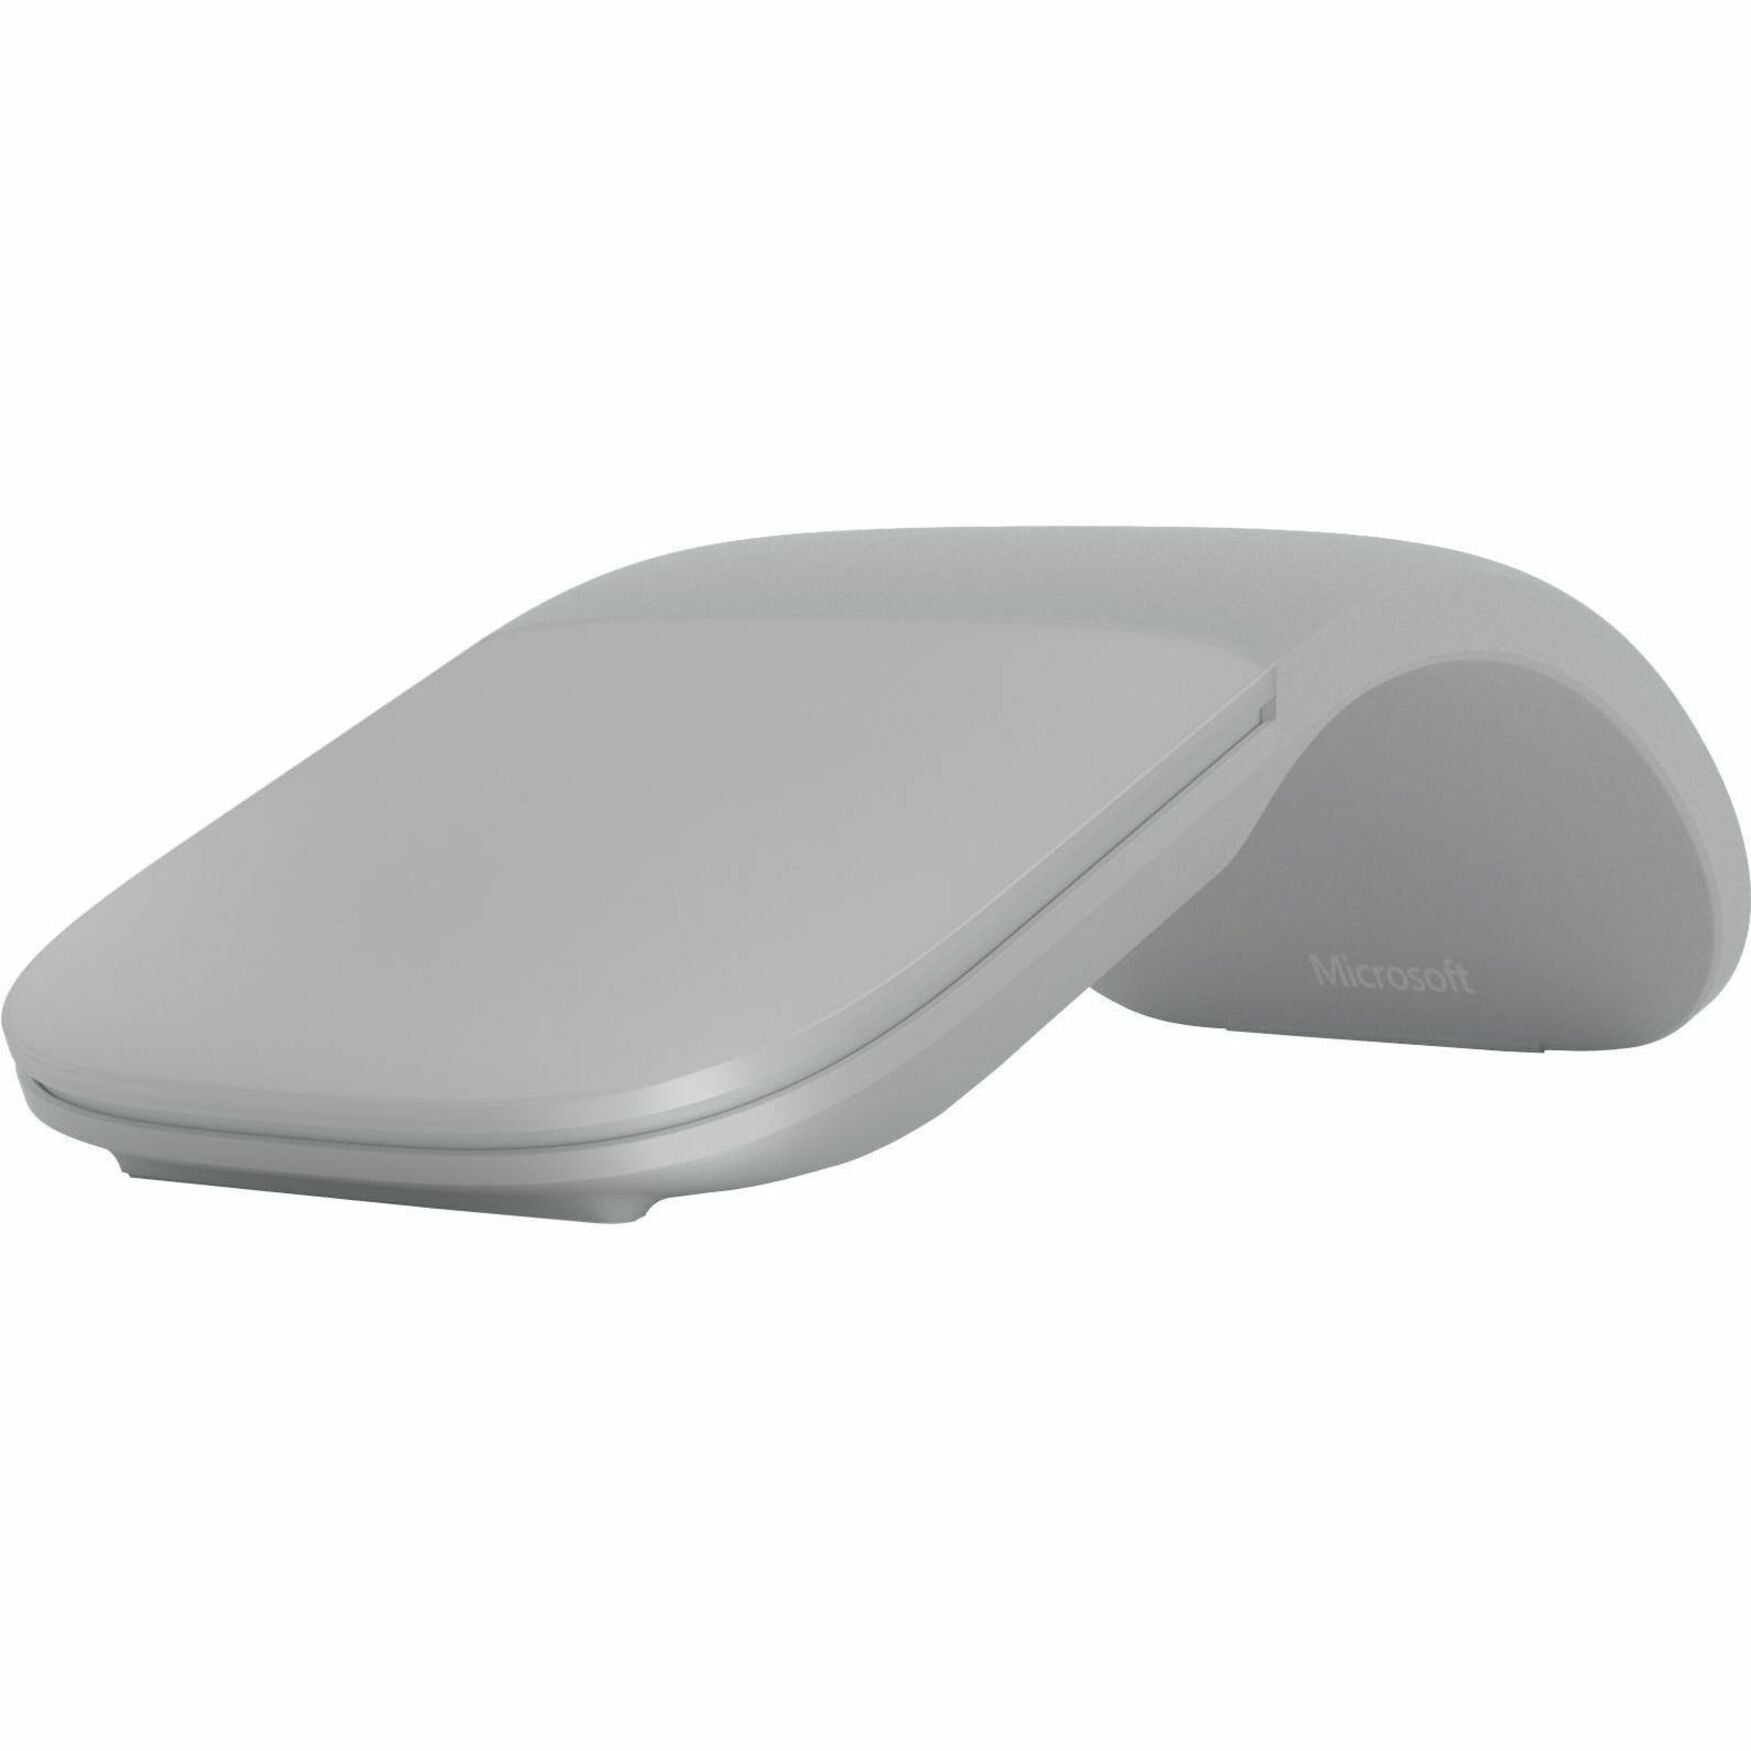 Microsoft FHD-00001 Arc Touch Mouse Surface Edition, Bluetooth Wireless Mouse for Light Gray Productivity